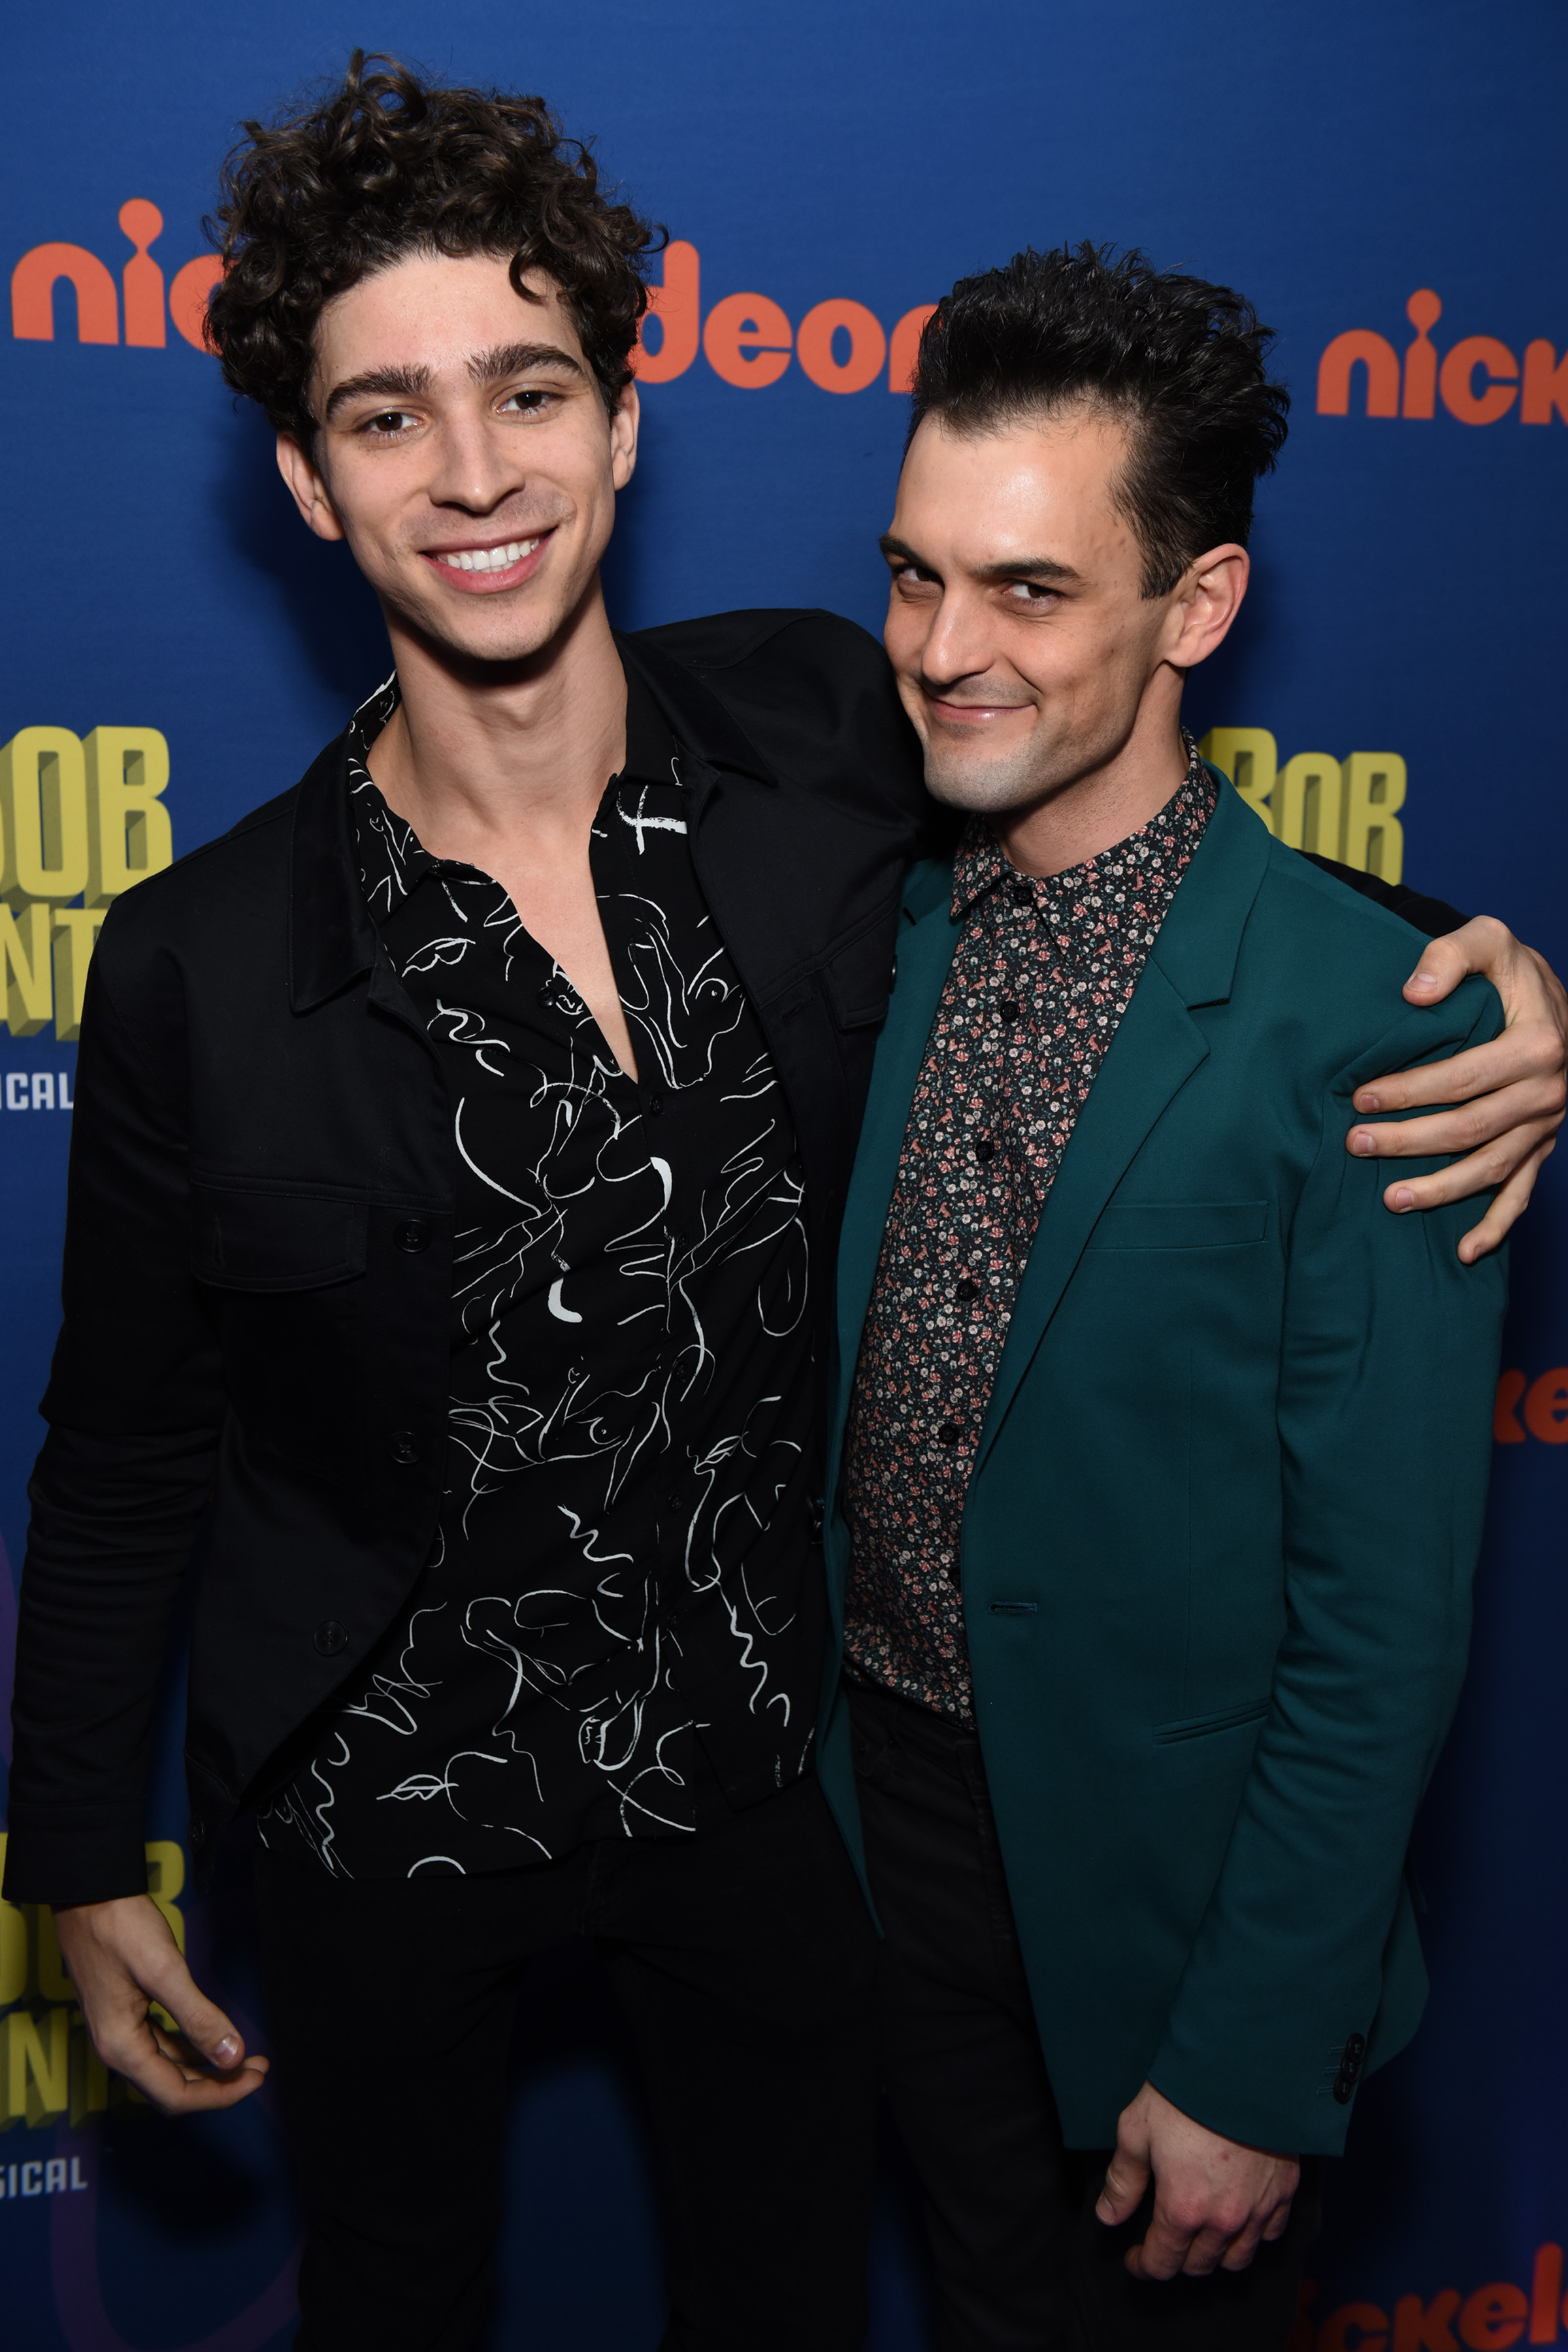 Wesley Taylor and Isaac Cole Powell attend the opening night of Nickelodeon's "SpongeBob SquarePants: The Broadway Musical" after party at Ziegfeld Ballroom on December 4, 2017, in New York City. | Source: Getty Images